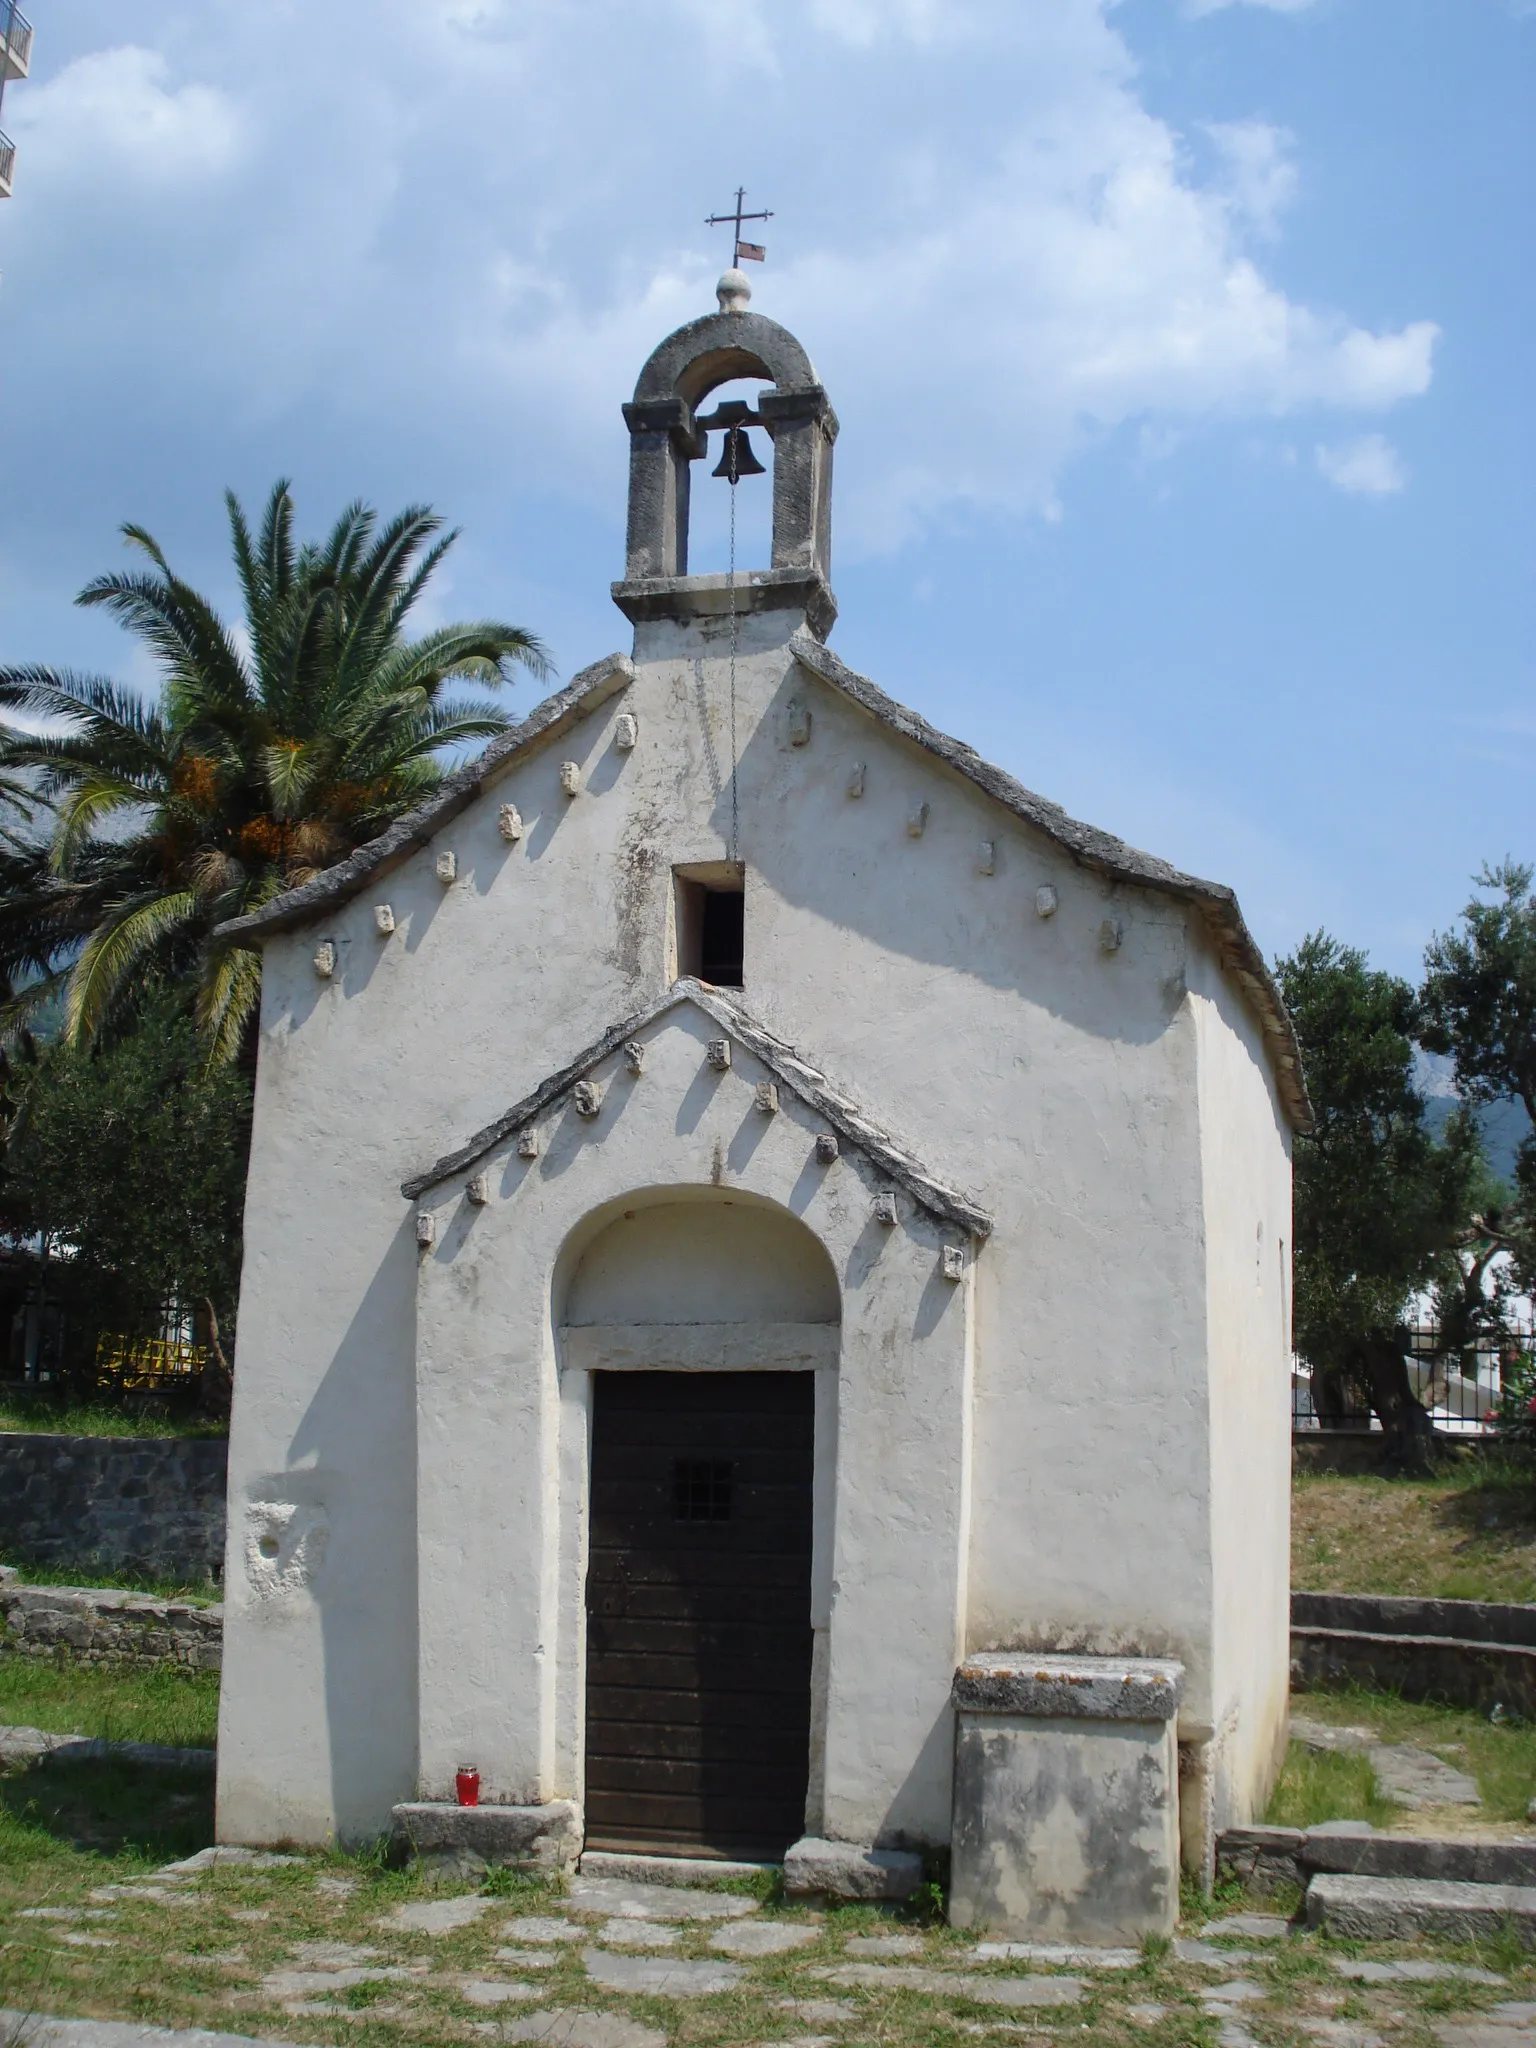 Photo showing: The Church of St. George (14th century), Tučepi, Croatia - front view